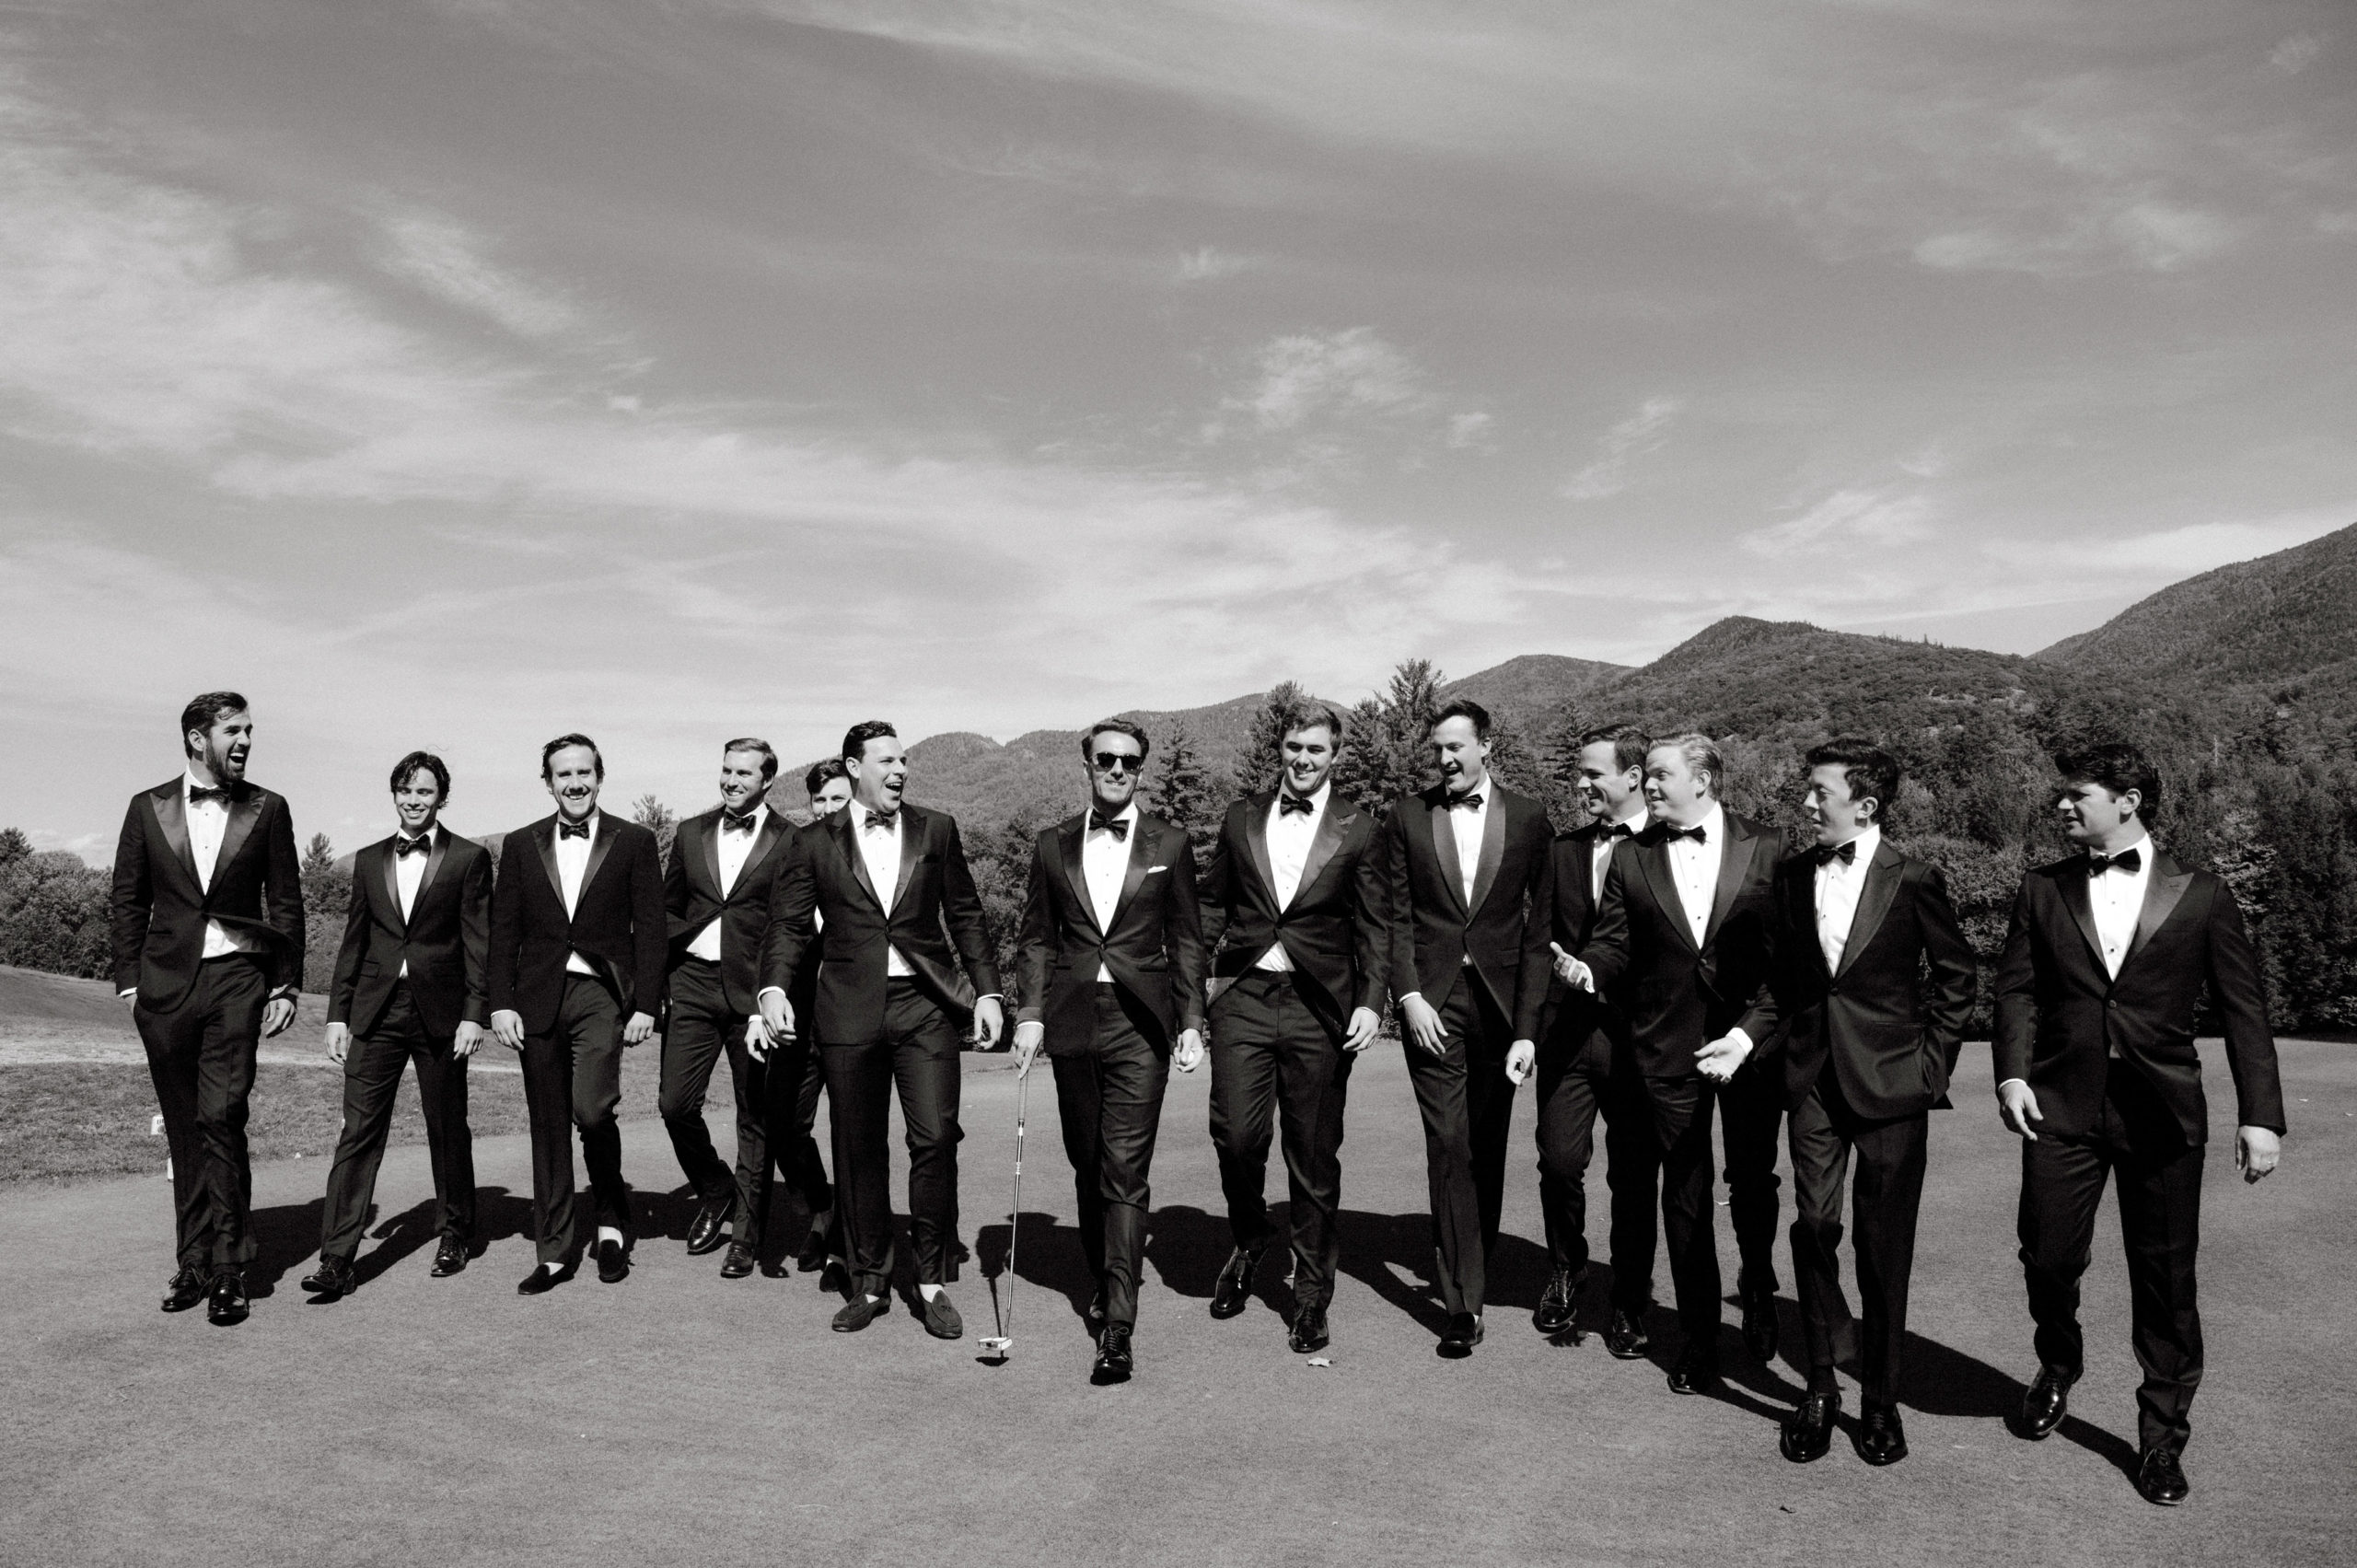 The groom together with his groomsmen, with The Adirondack Mountains in the background. Image by Jenny Fu Studio